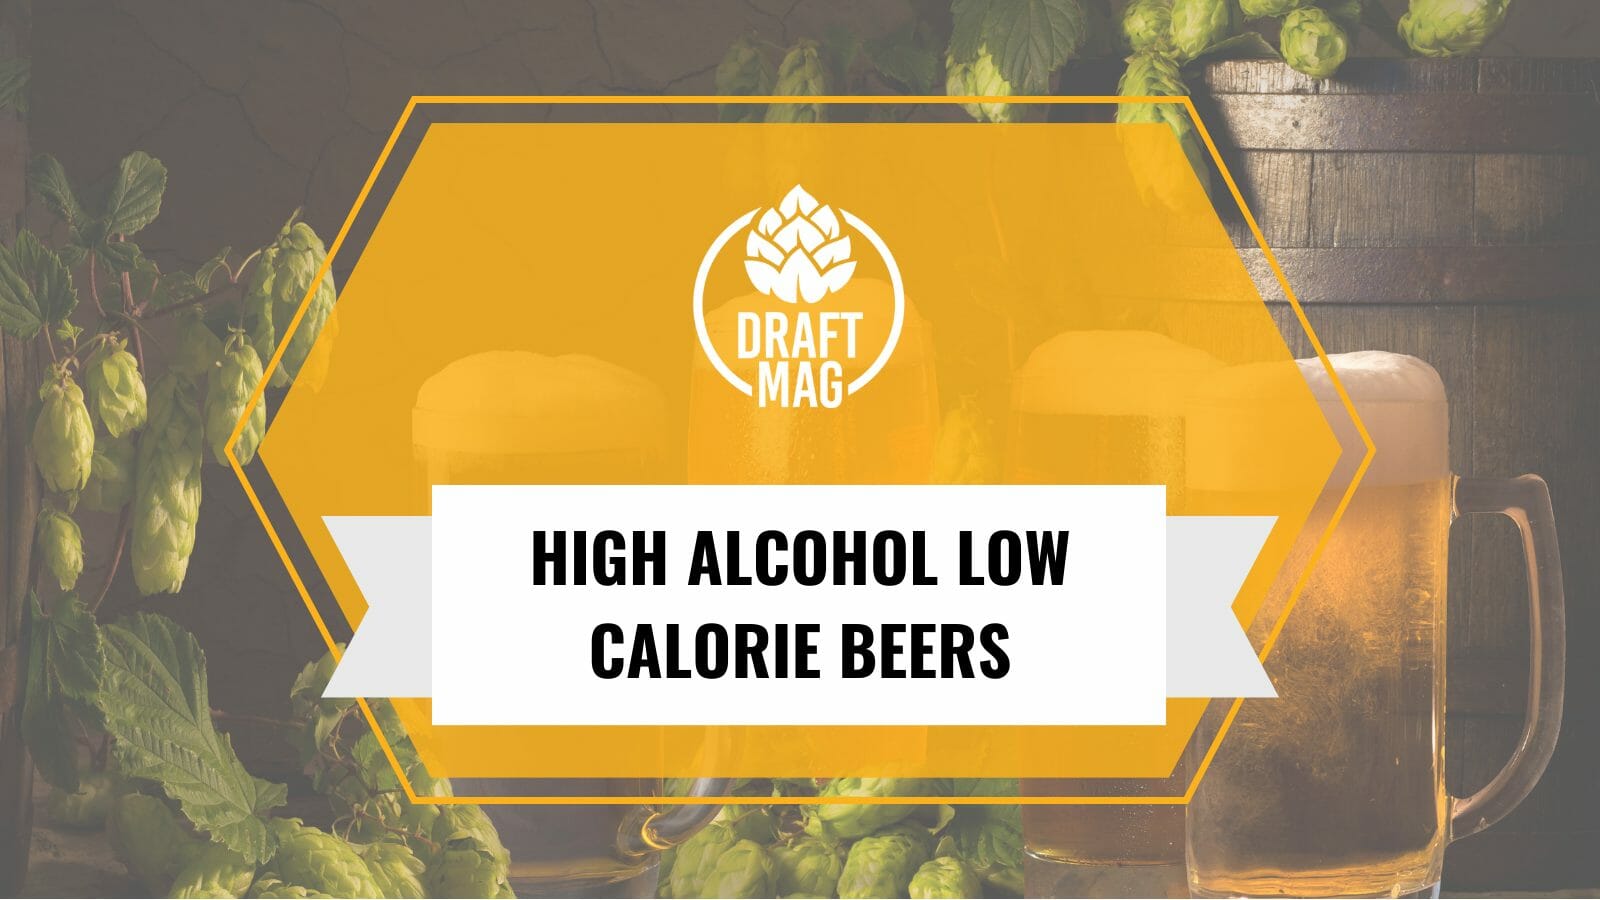 High alcohol low calorie beers